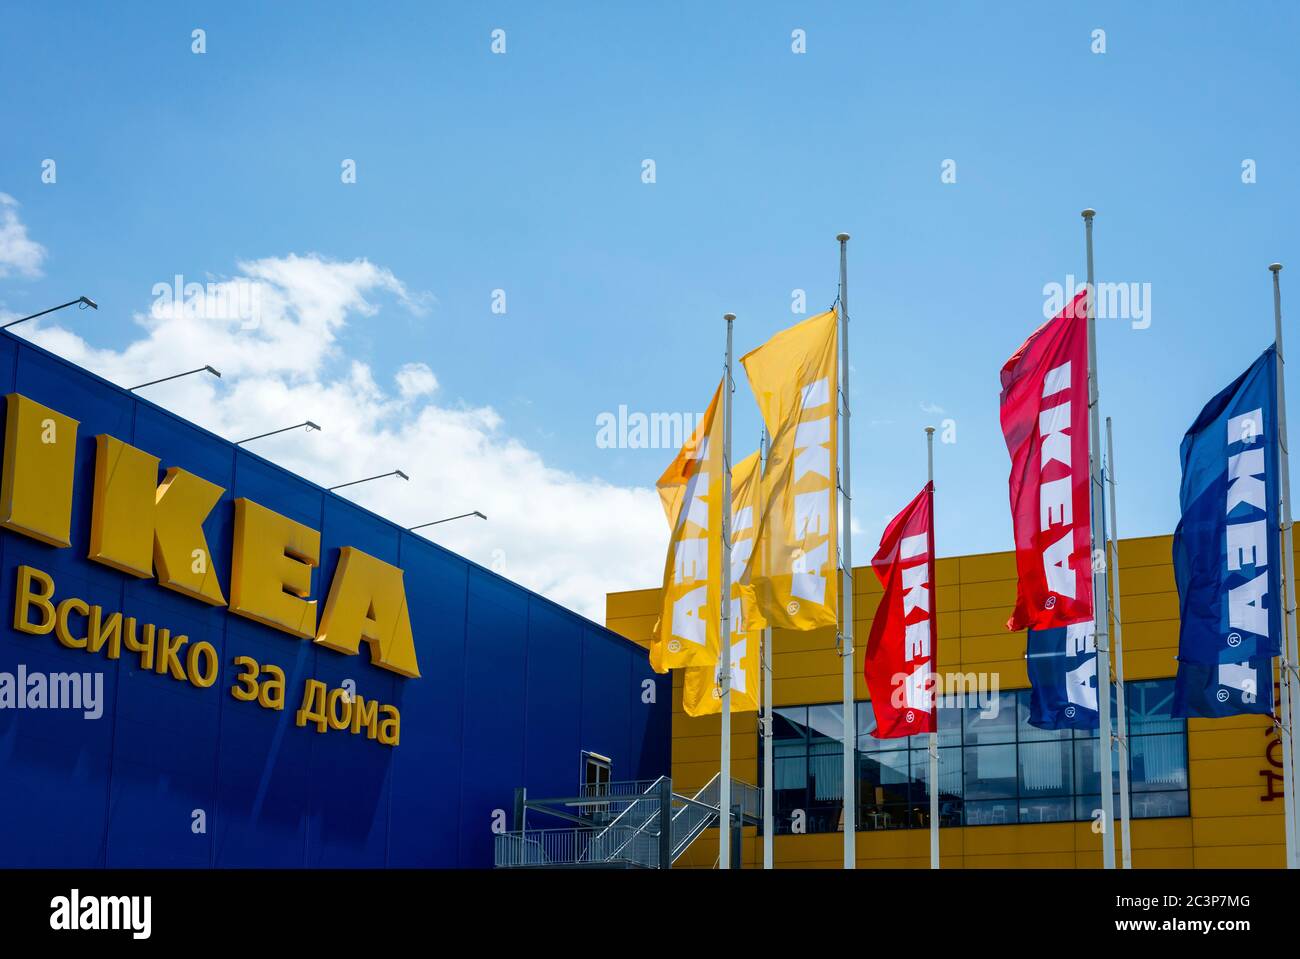 IKEA sign and brand logo in Cyrillic writing at the Sofia Bulgaria store branch with multicolored or multicoloured waving flags against blue sky Stock Photo